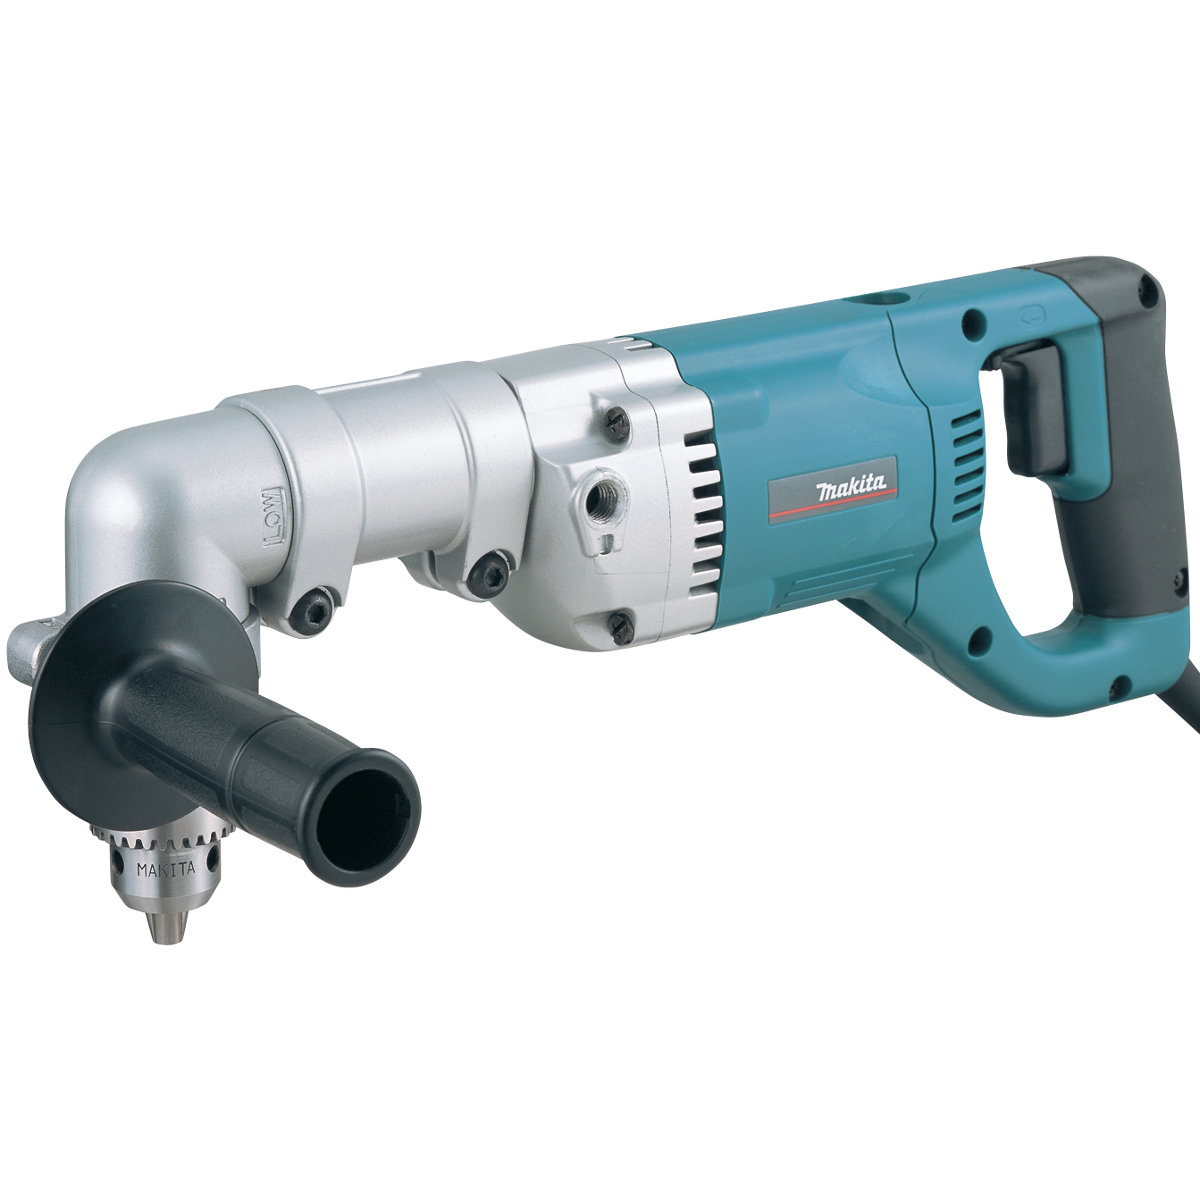 https://www.wellerhire.co.uk/wp-content/uploads/2015/10/Right-Angle-Drill-Heavy-Duty-Tool-Hire.jpg